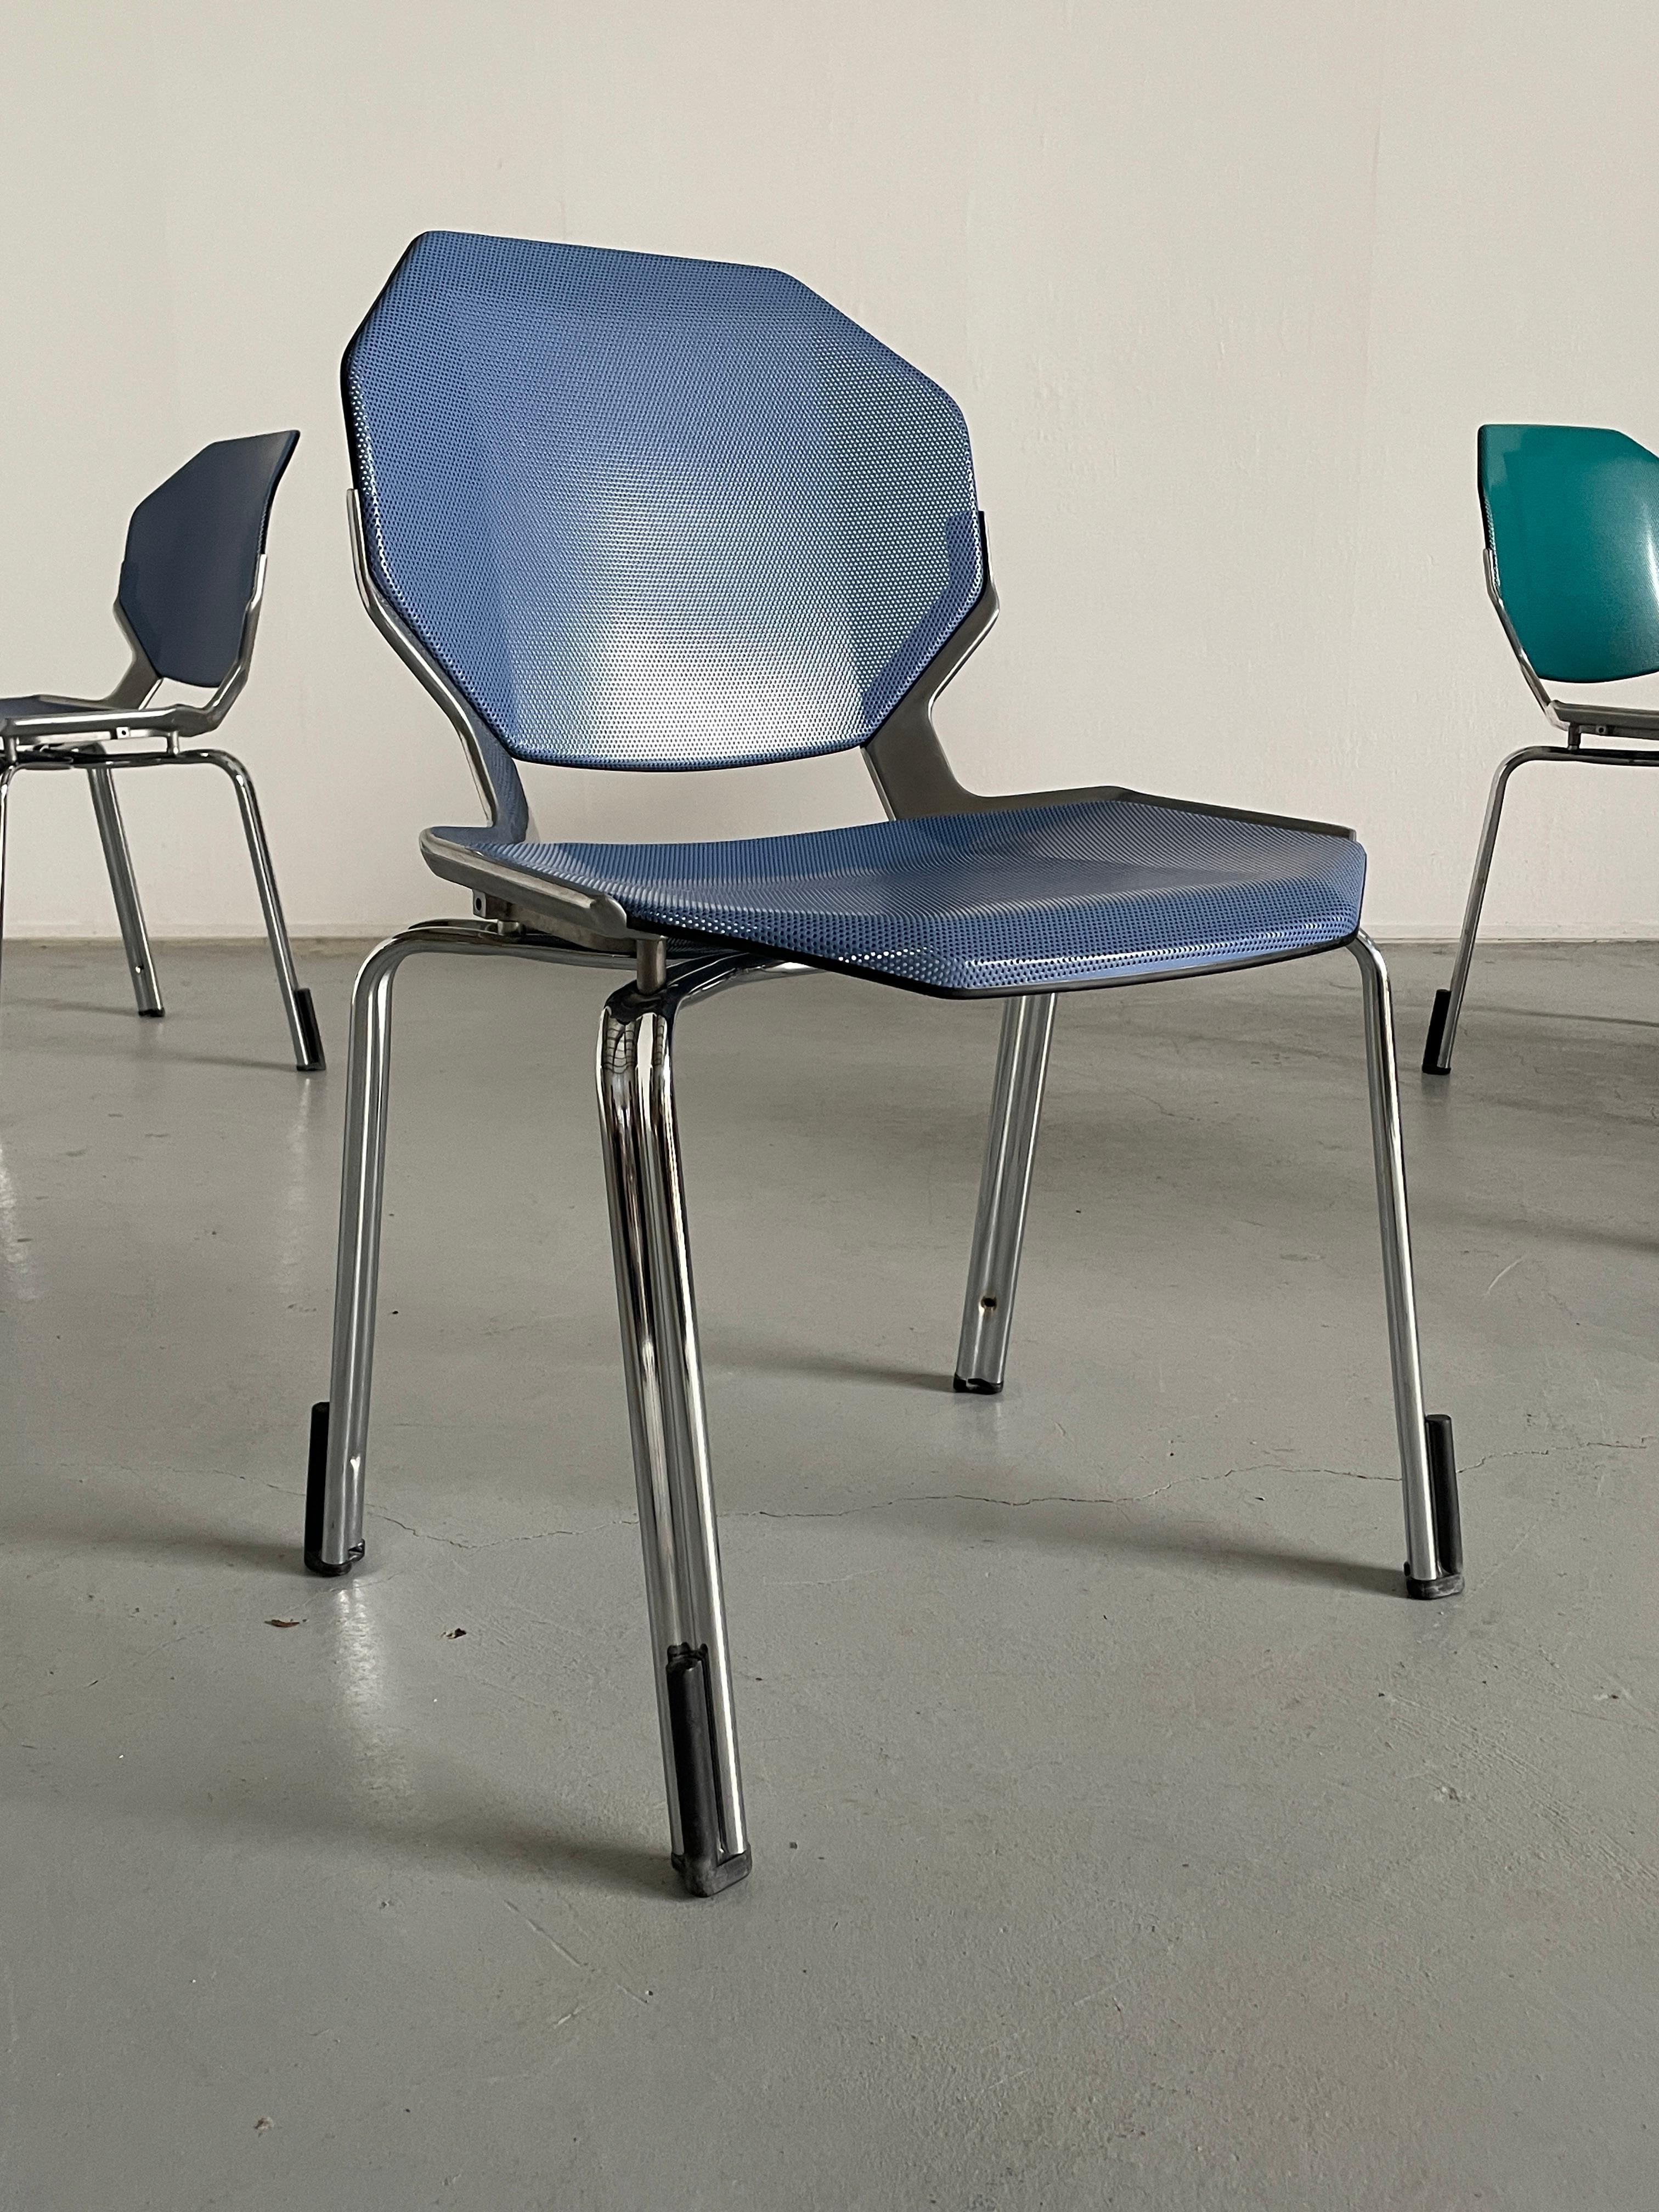 Space Age Futuristic Octagonal Stackable Dining Chairs by Fröscher Sitform, 90s For Sale 10